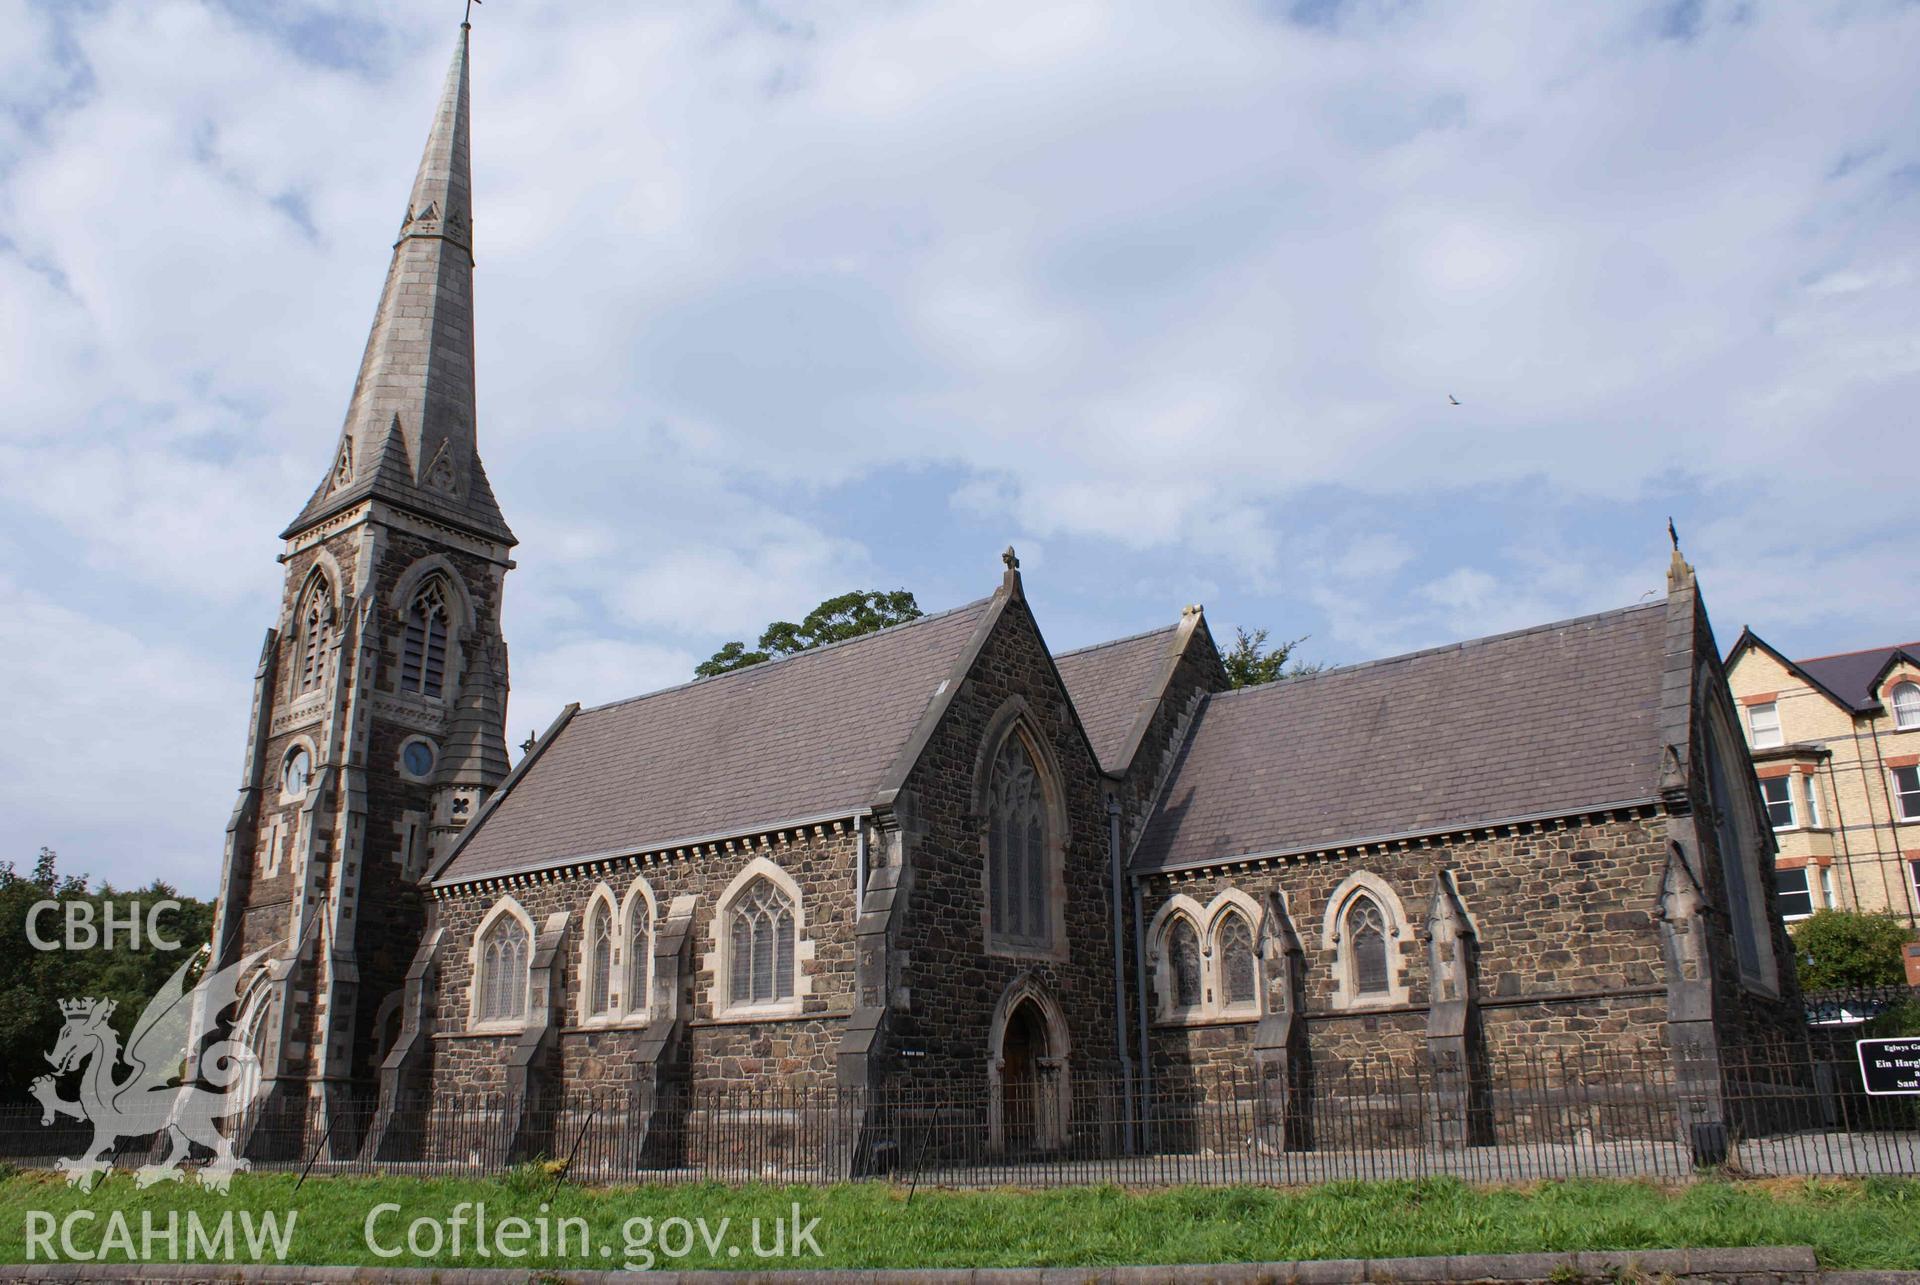 Digital colour photograph showing exterior of Our Lady and St James Catholic church, Bangor.